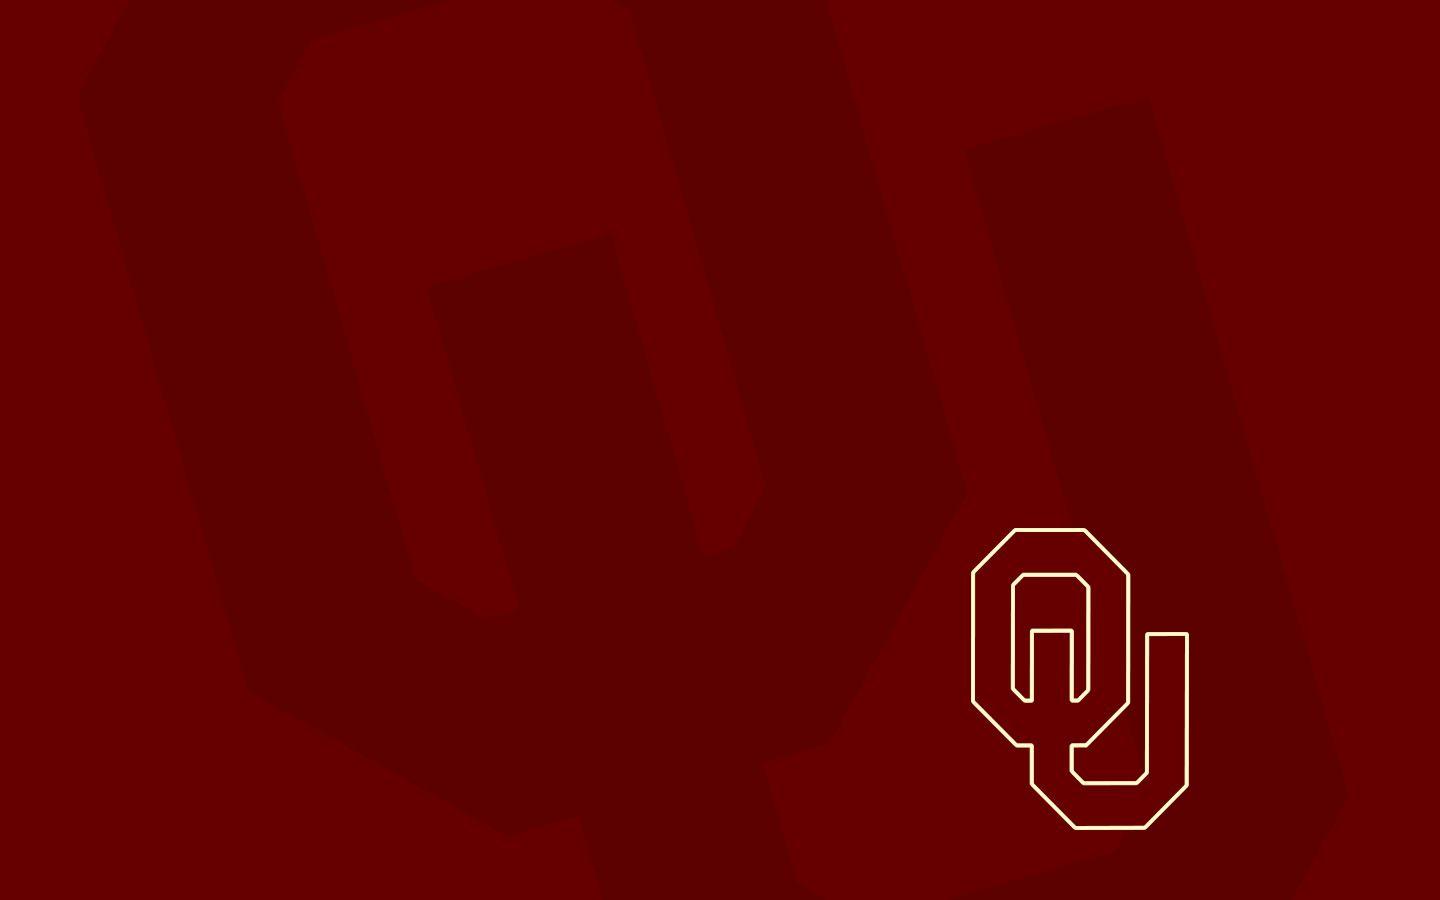 Oklahoma Sooners Chrome Wallpaper, Browser Themes and More